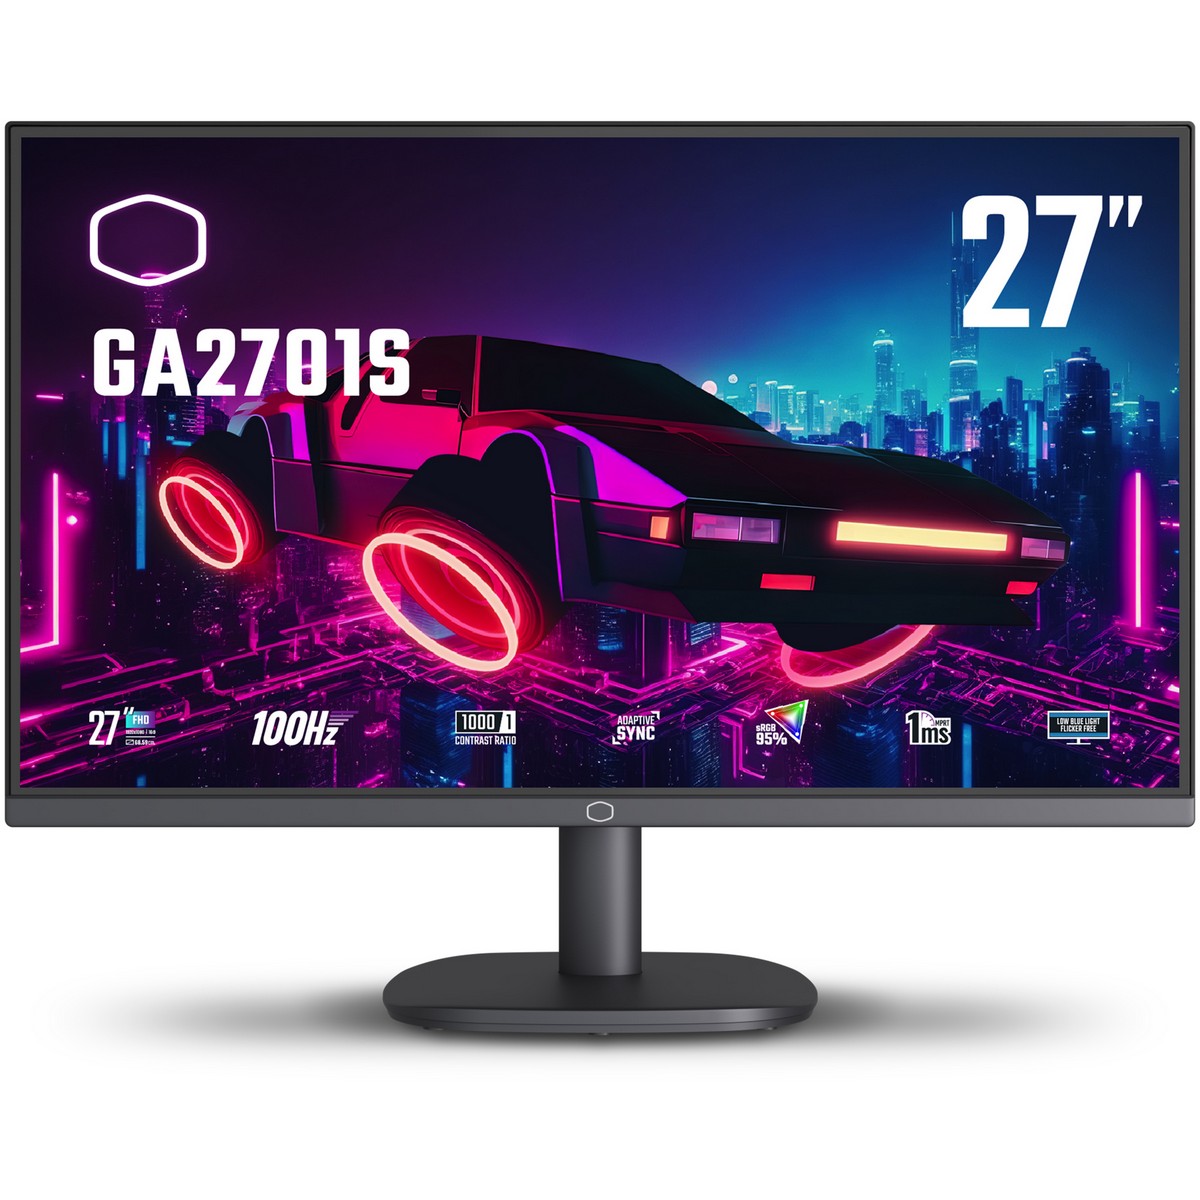 Cooler Master 27"  GA2701S 1920x1080 IPS 100Hz 1ms A-Sync Gaming Monitor